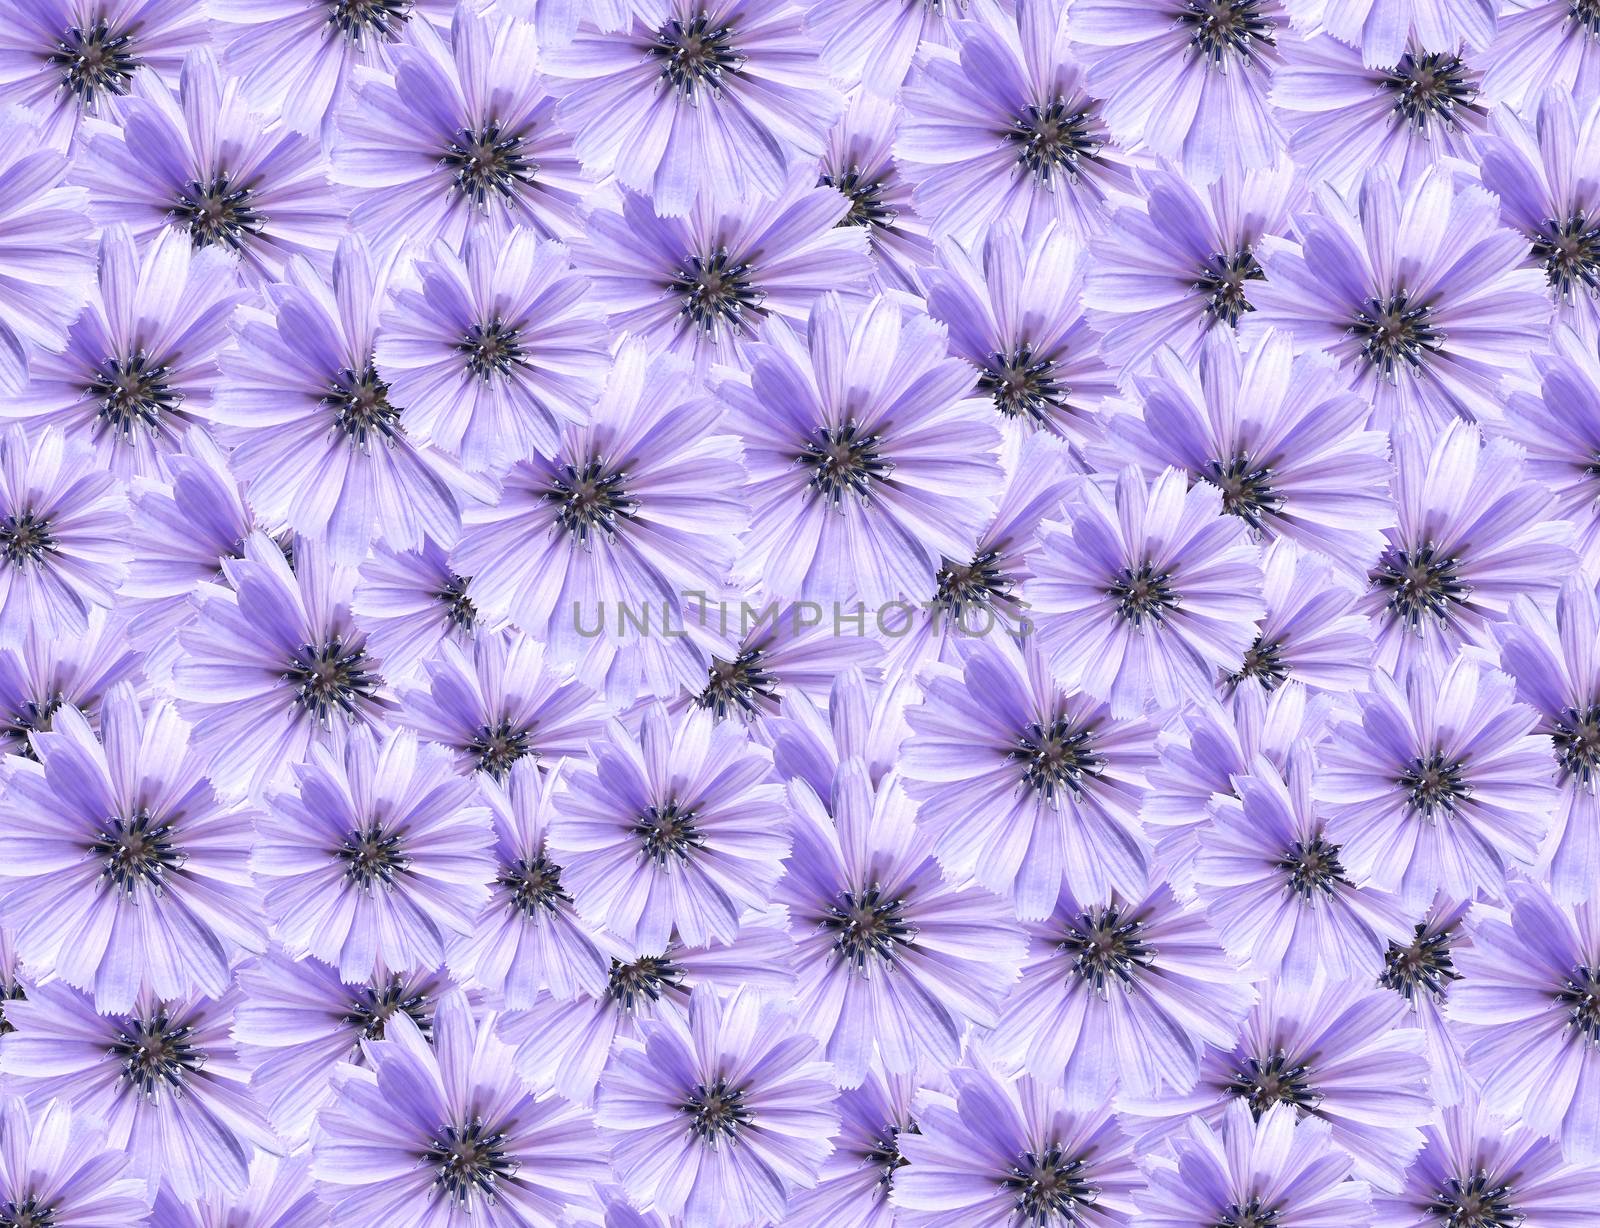 Nice background made from lot of blue daisy flowers